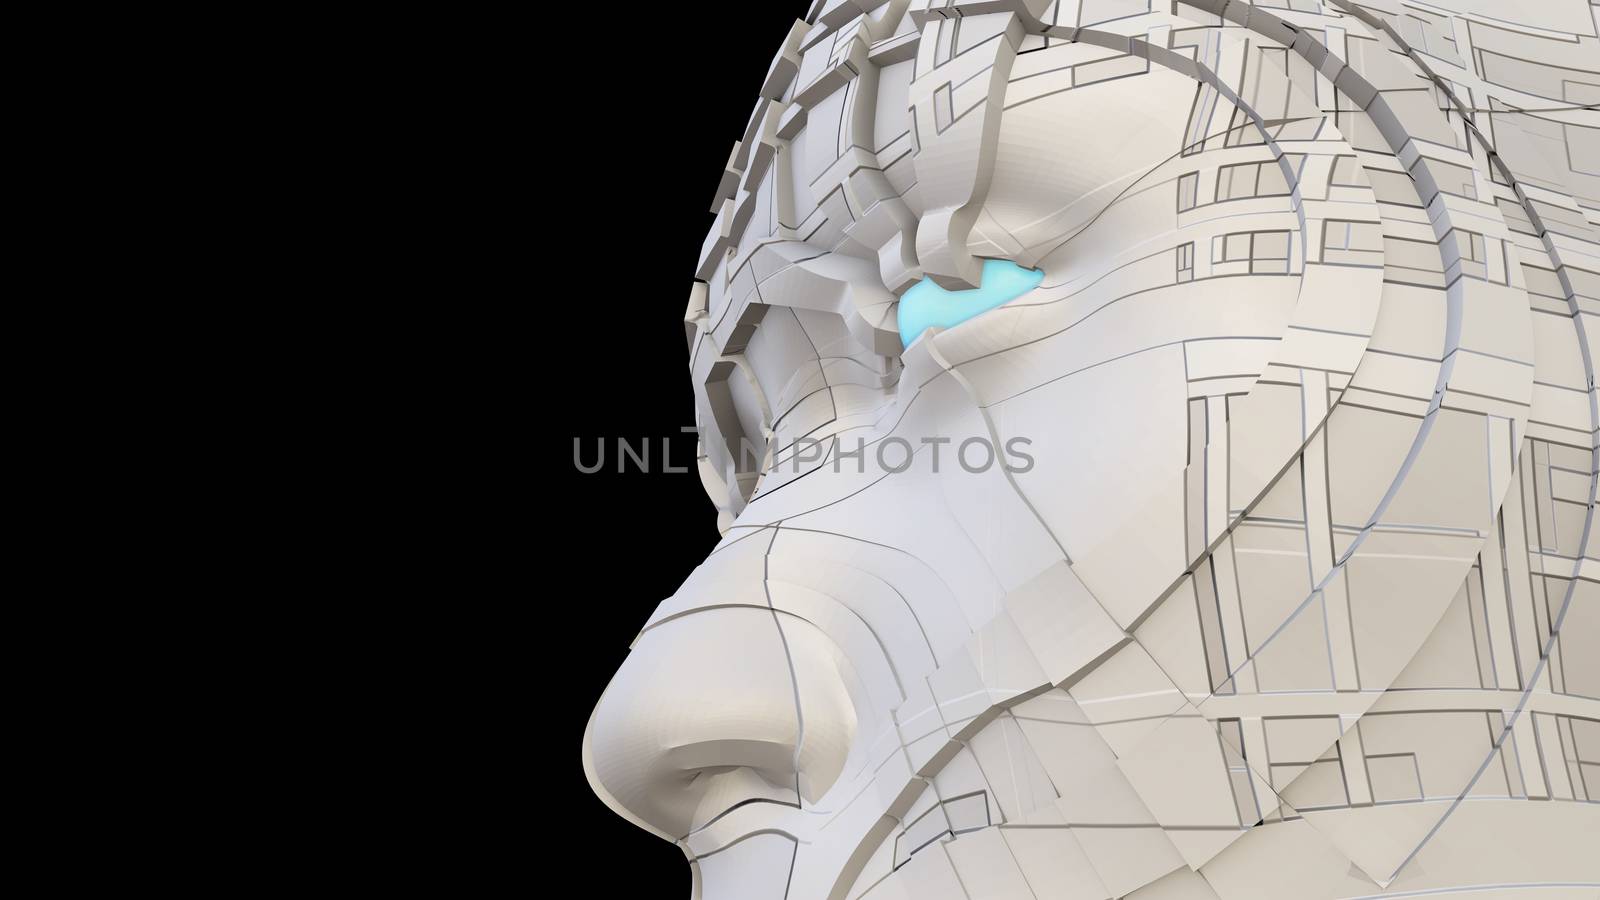 Futuristic robot of dark color with luminous parts of blue and orange. Isolated on black background. The concept of robotic and industrial revolution 4.0. 3D illustration